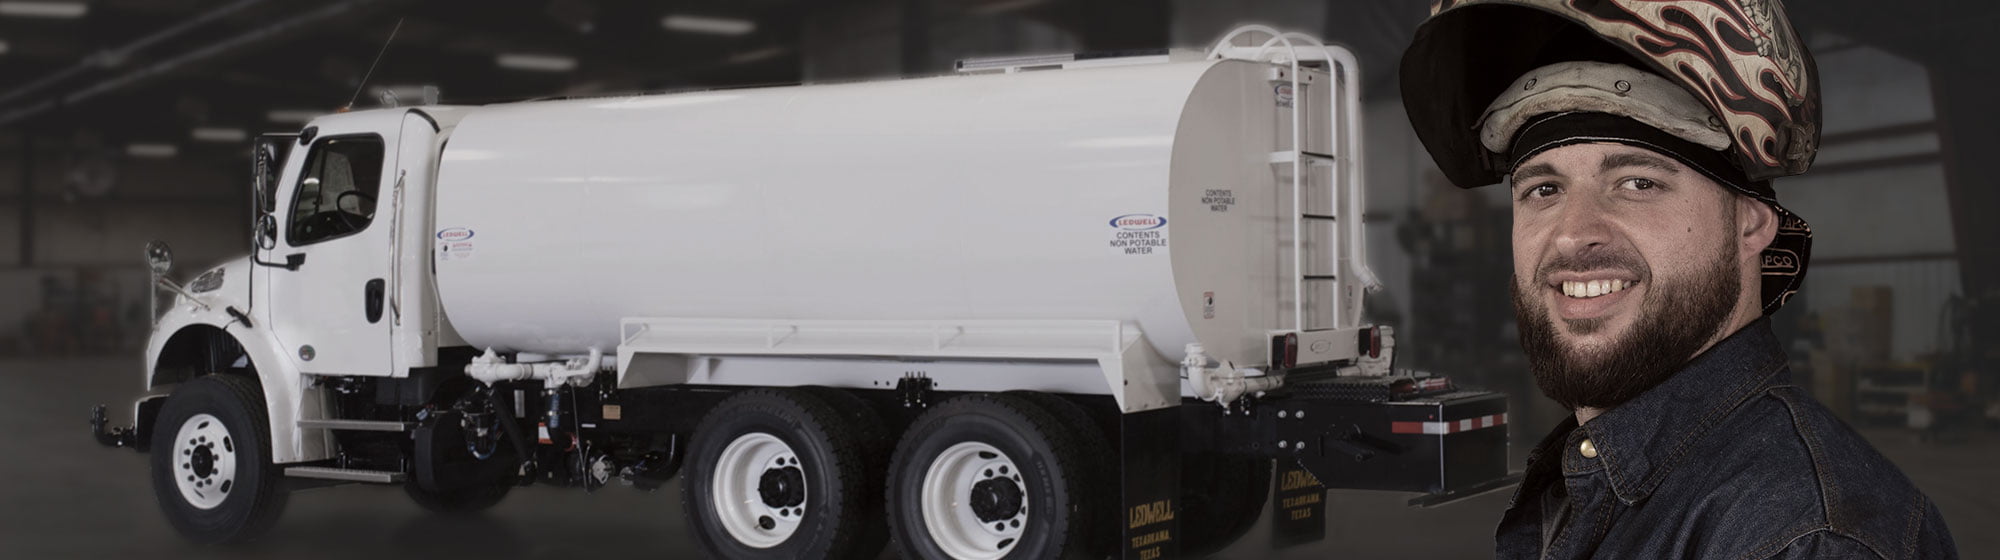 Water tank truck for sale ledwell